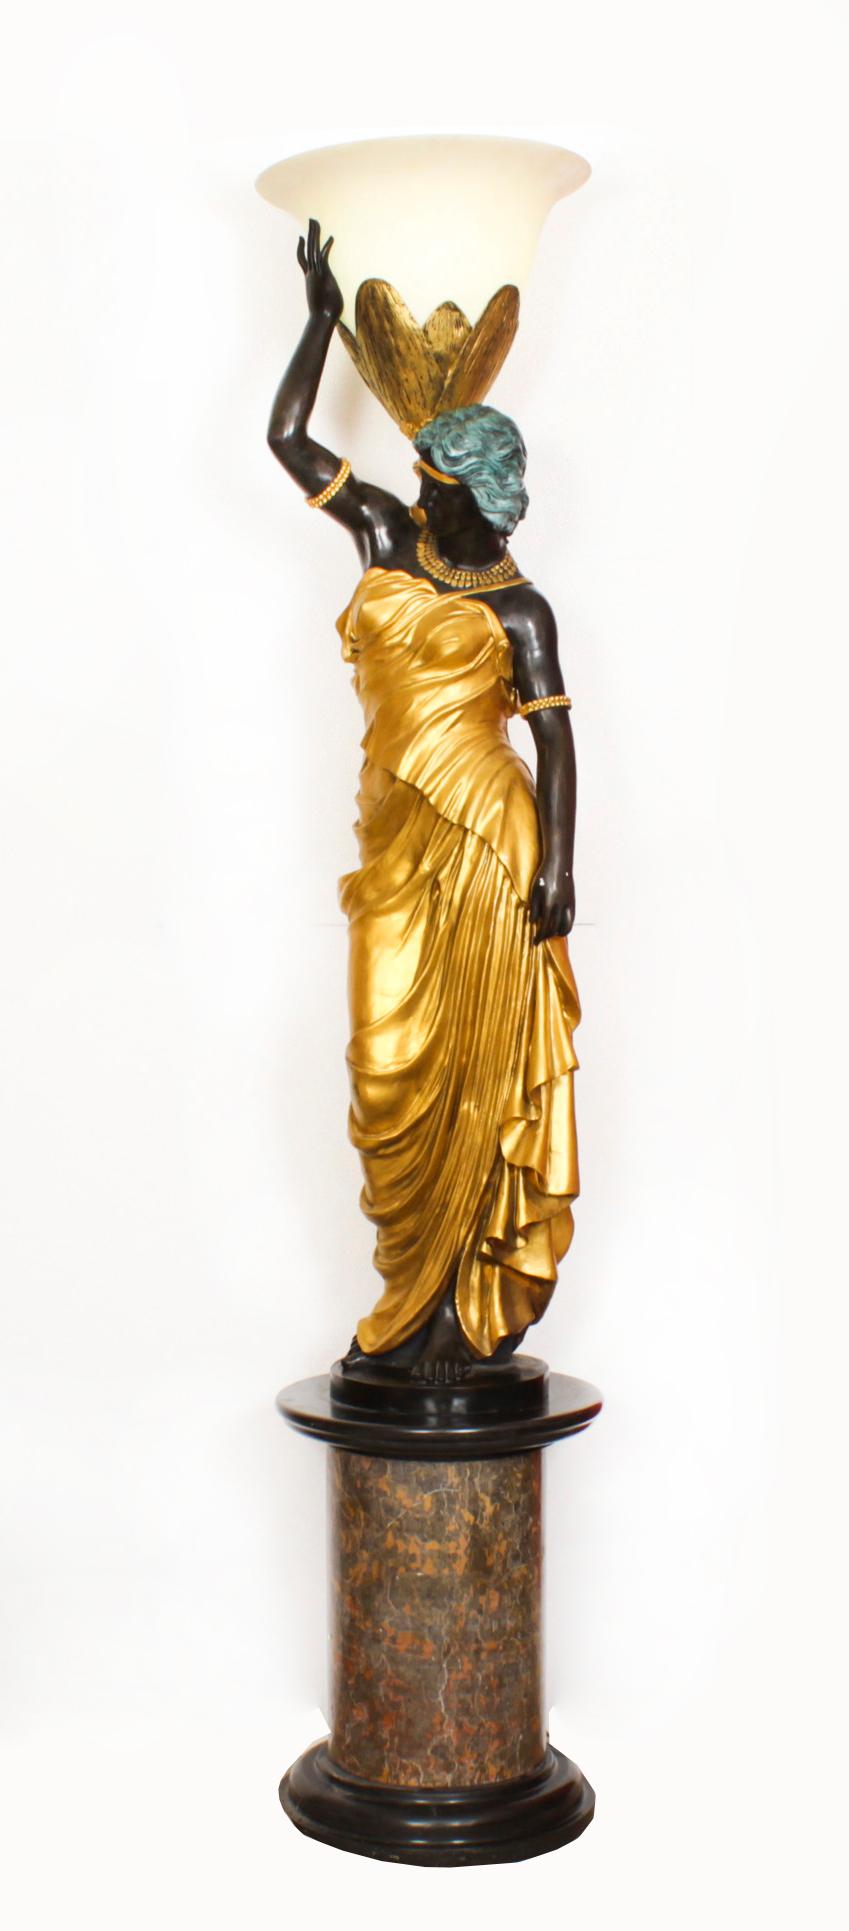 After Milo, Miguel Fernando Lopez, Portuguese, contemporary, a magnificent monumental pair of gilded life size lady statue bronze lamps set on circular two colour solid marble bases, Circa 1980 in date.

The two ladies are adorned in long and